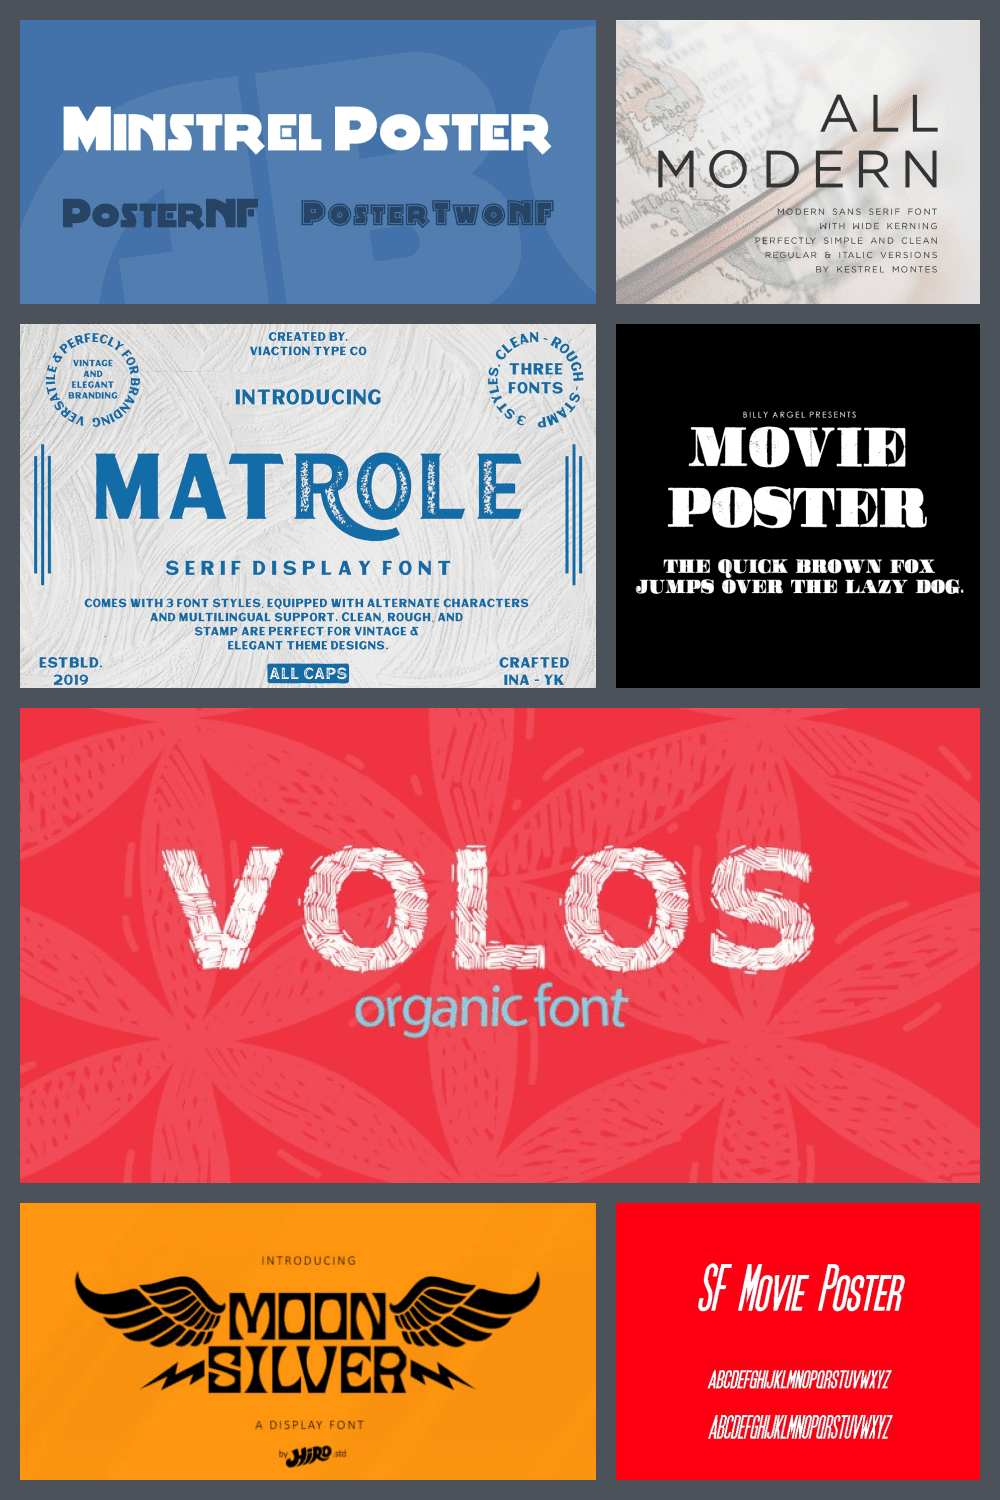 Best Fonts for Posters pinterest.